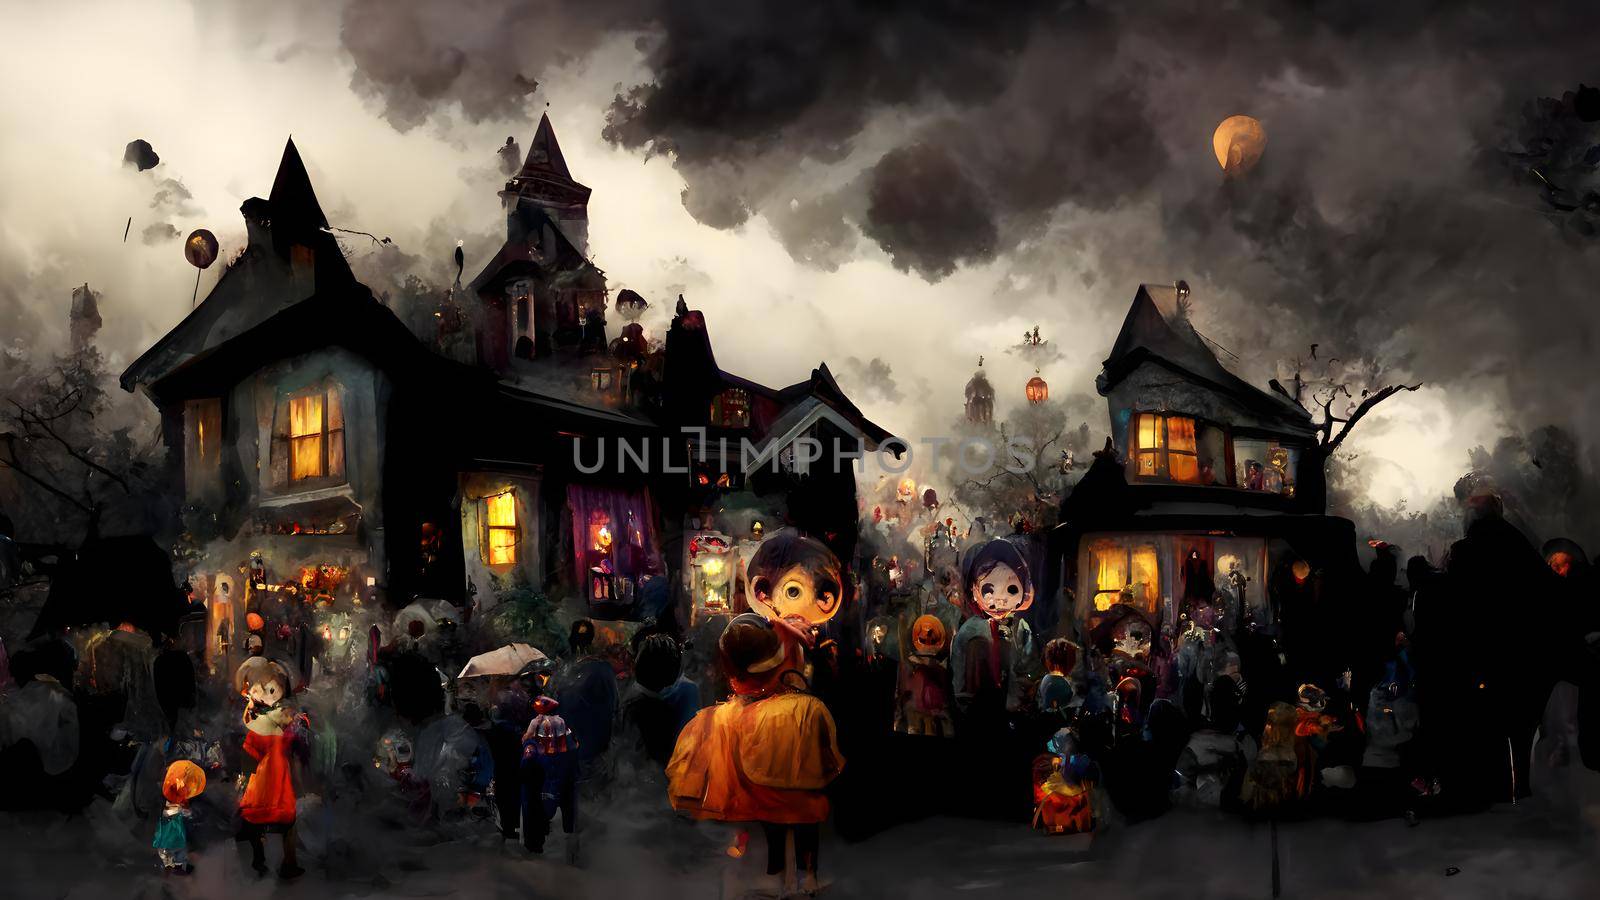 kids playing on night halloween street, neural network generated image. by z1b